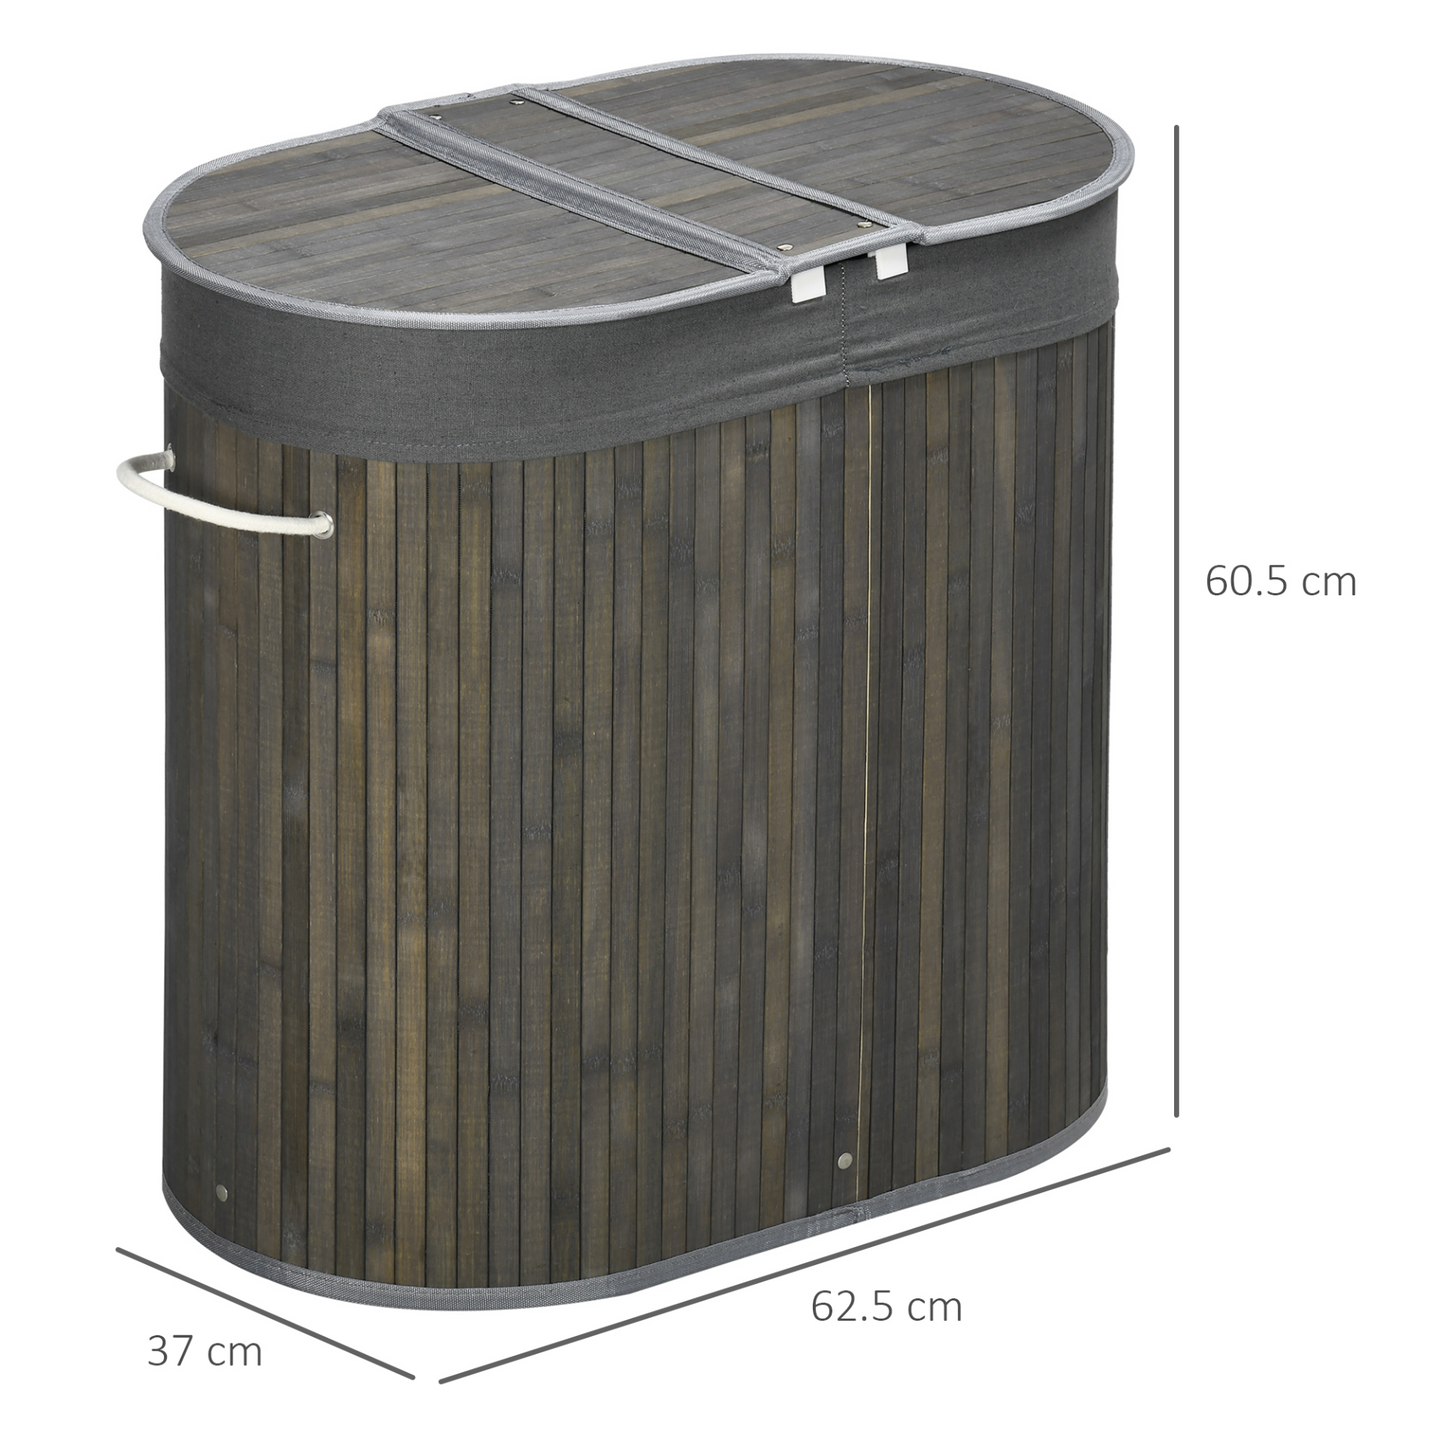 HOMCOM Bamboo Laundry Basket with Lid, 100 Litres Laundry Hamper with 2 Sections, Removable Washable Lining, Washing Baskets, 62.5 x 37 x 60.5cm, Grey